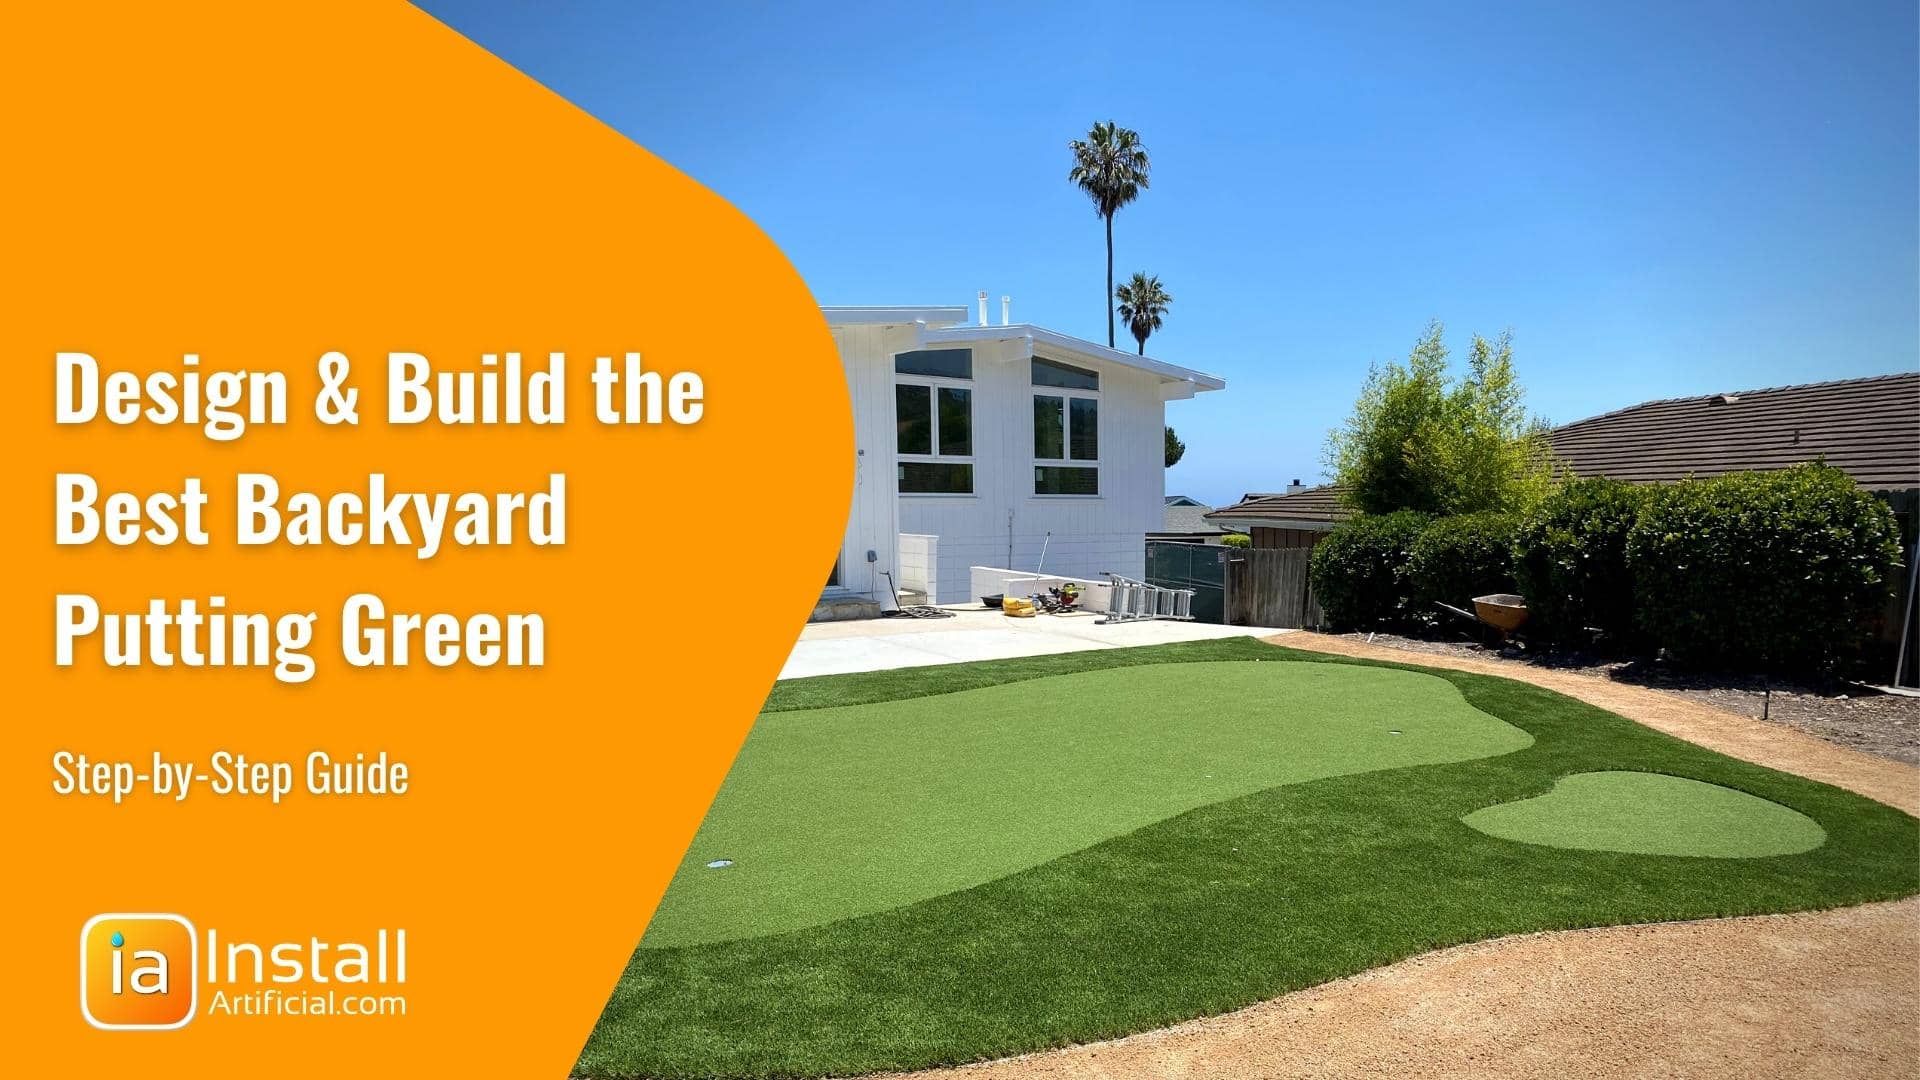 Guide to Design and Build the Best Backyard Putting Green